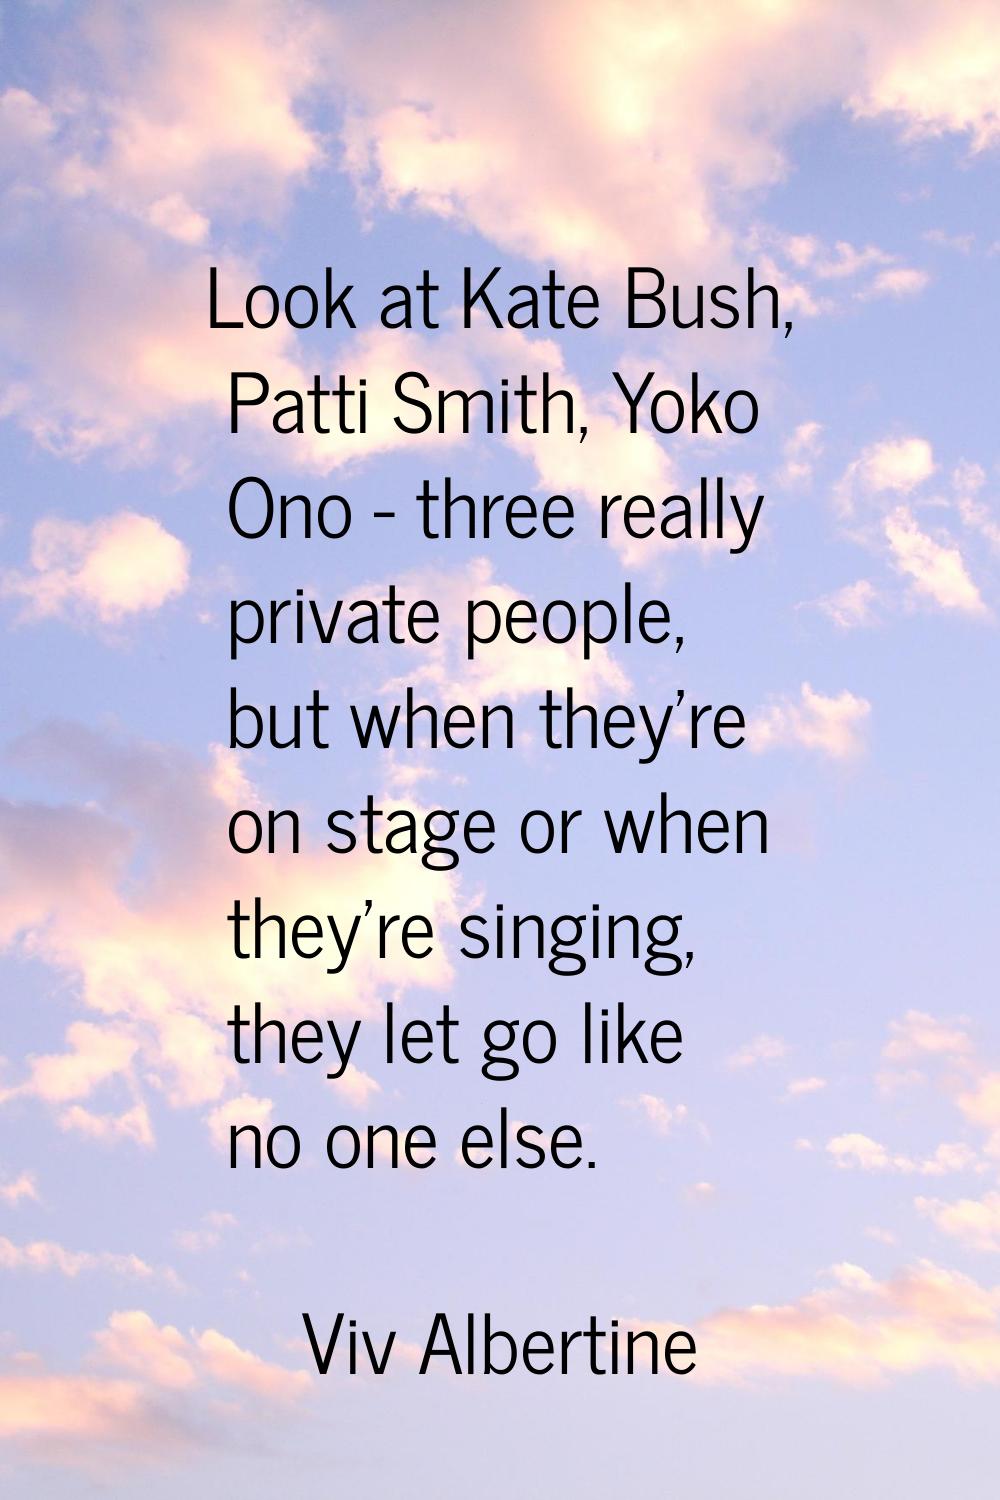 Look at Kate Bush, Patti Smith, Yoko Ono - three really private people, but when they're on stage o